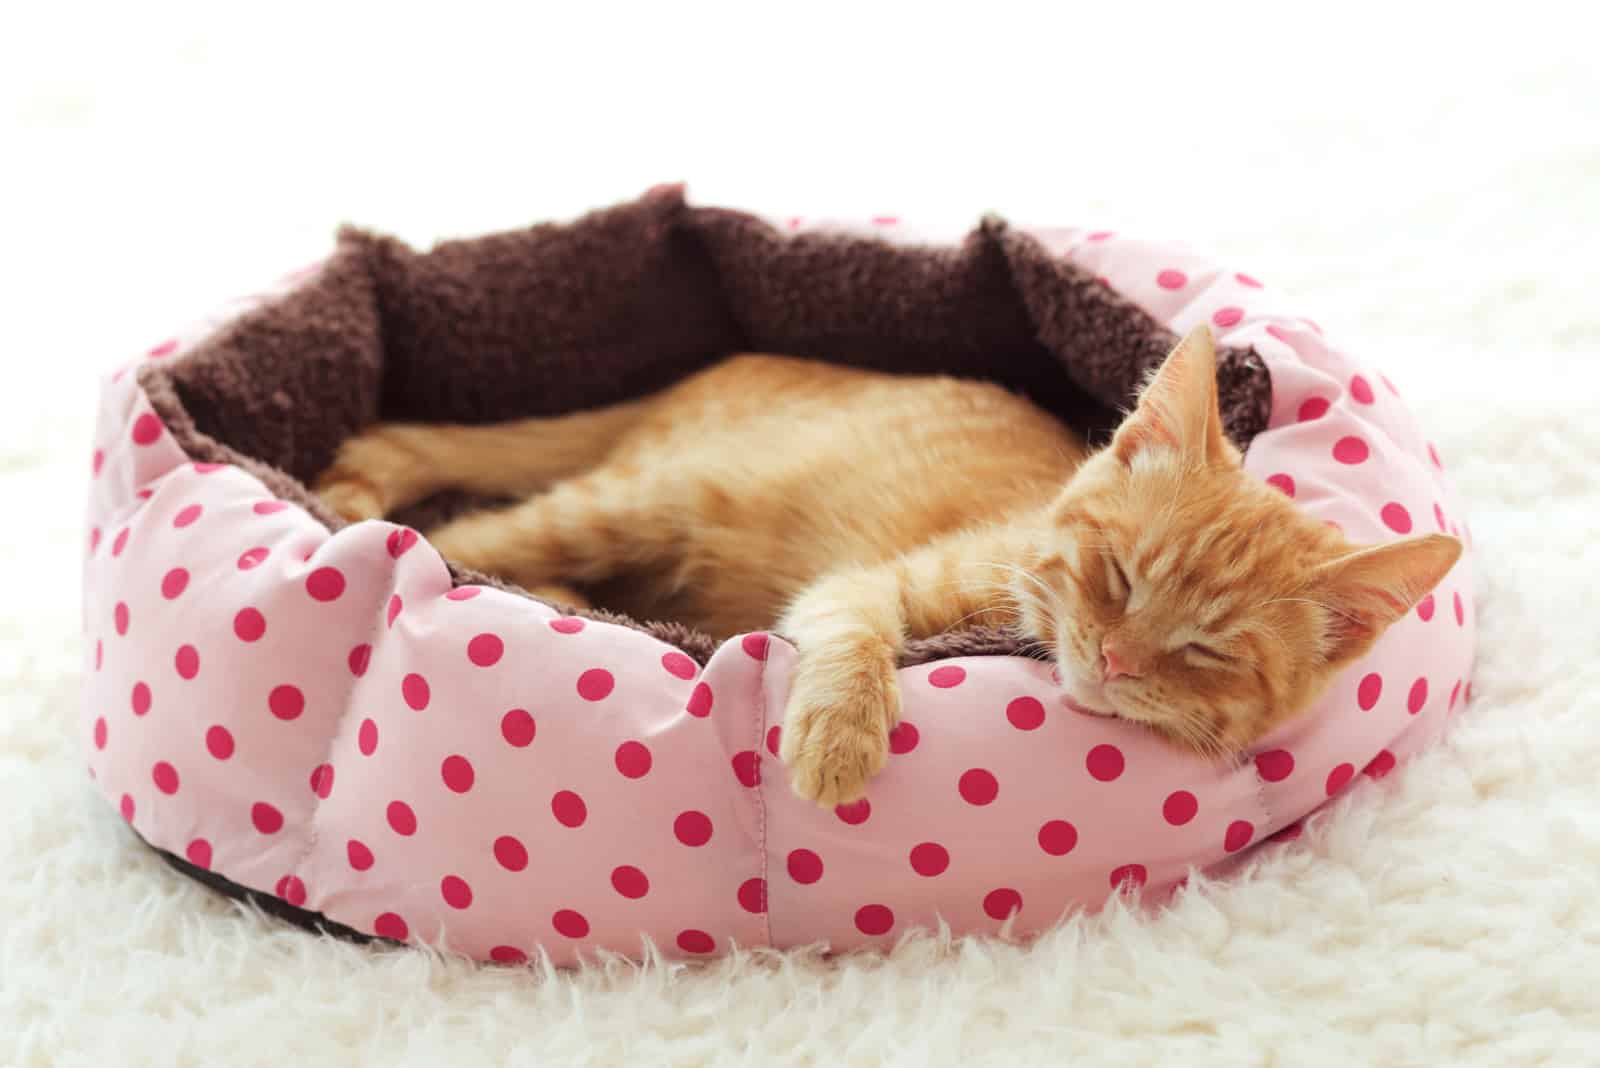 A ginger kitten sleeps in his soft cozy bed 